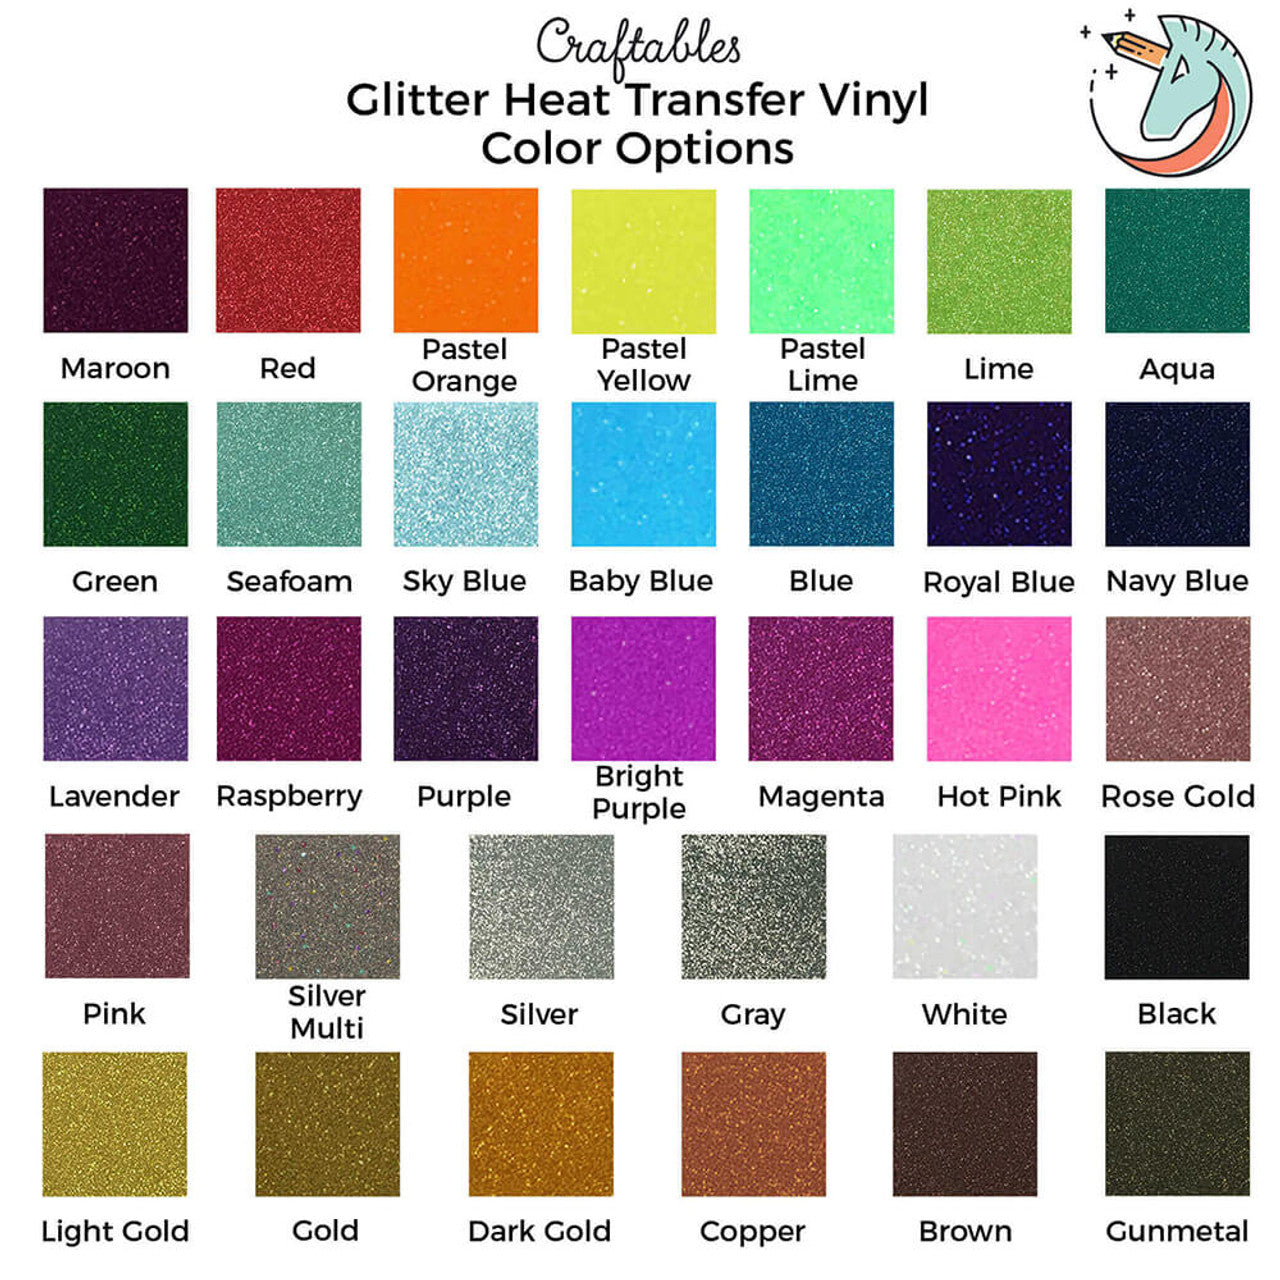 Lime Glitter Heat Transfer Vinyl Sheets By Craftables